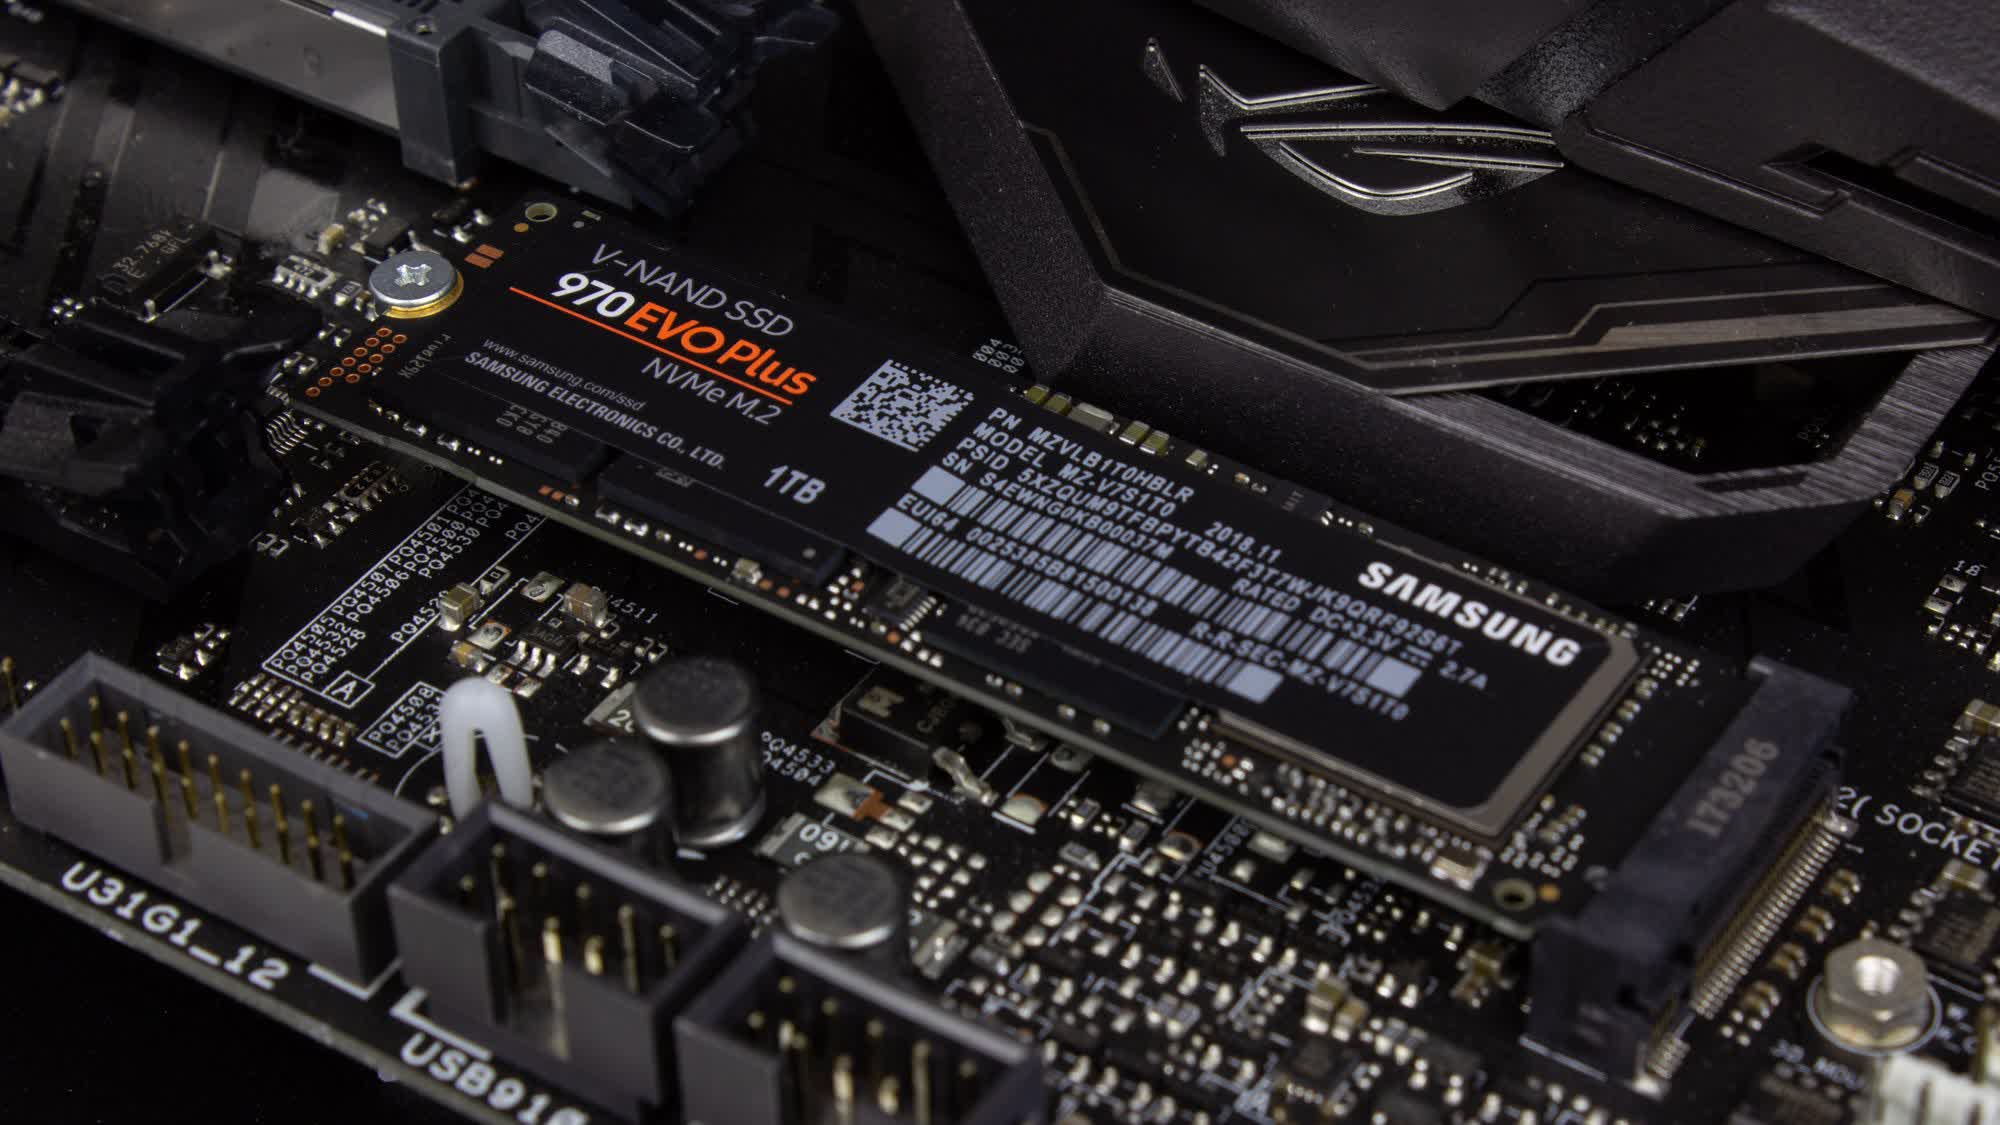 Samsung is swapping parts in their 970 Evo Plus SSDs and sabotaging performance